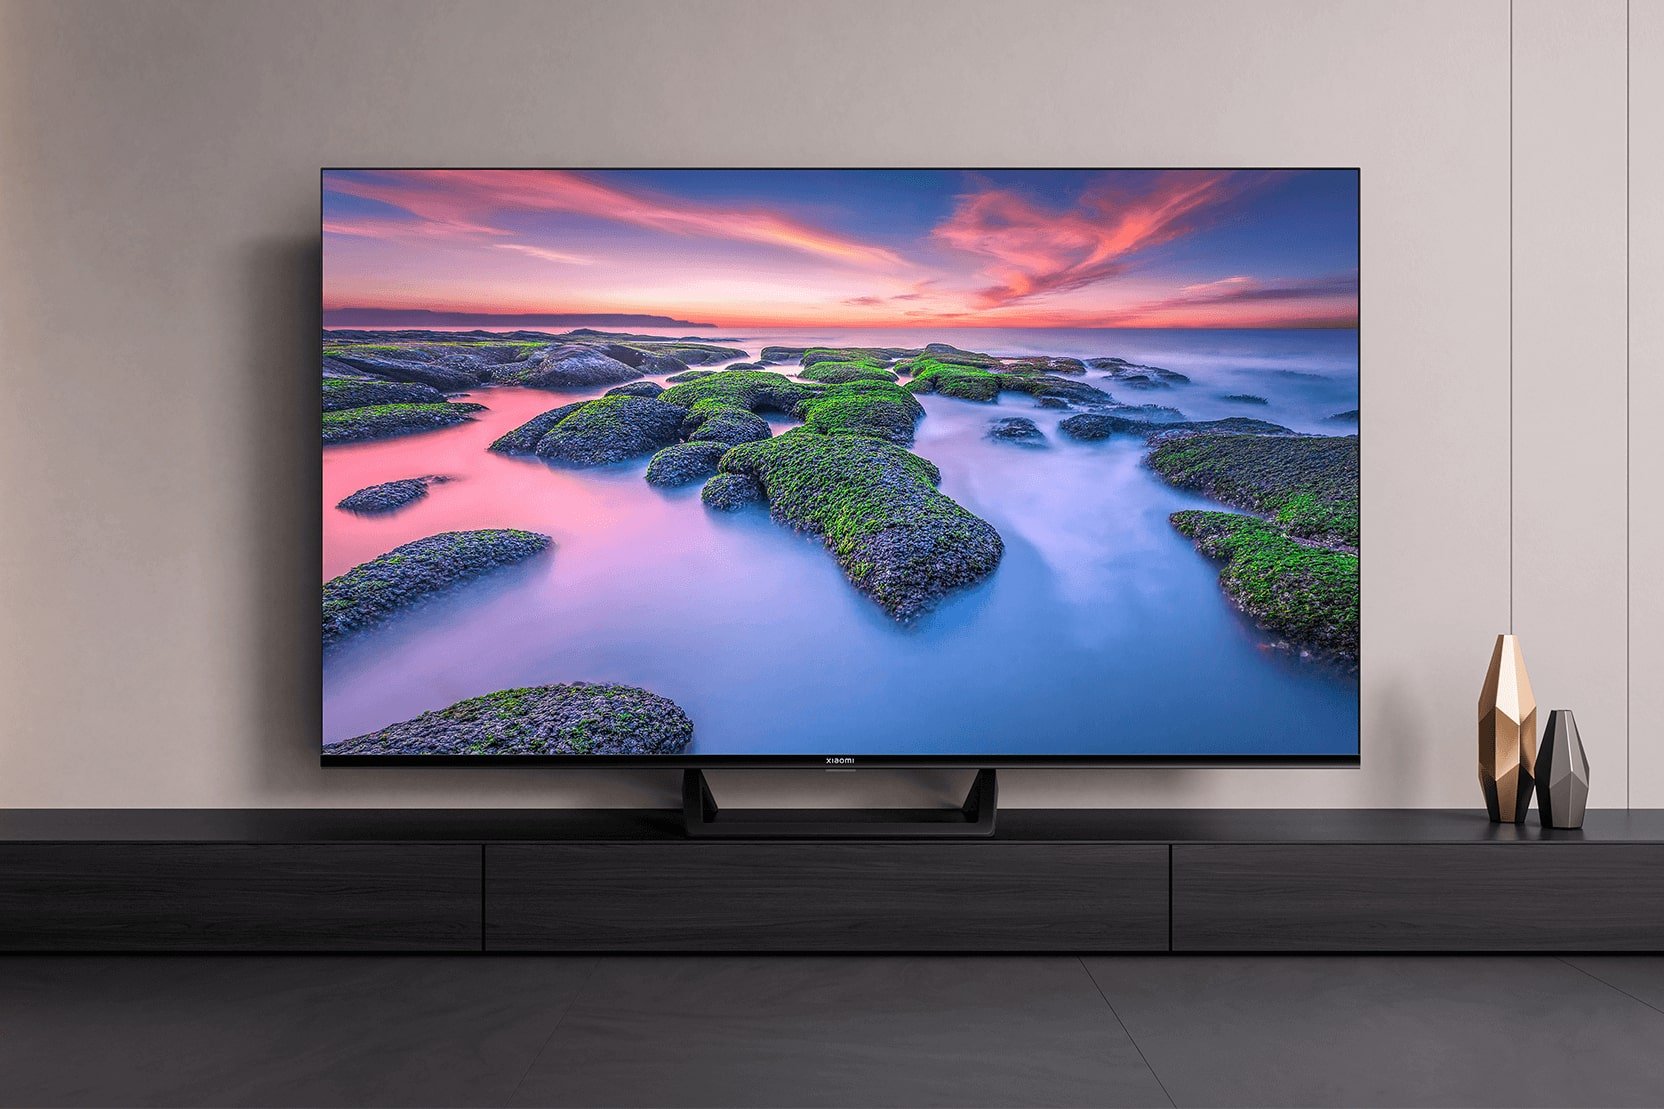 Xiaomi TV X With 4K Dolby Vision Display Launched in India: Price,  Specifications